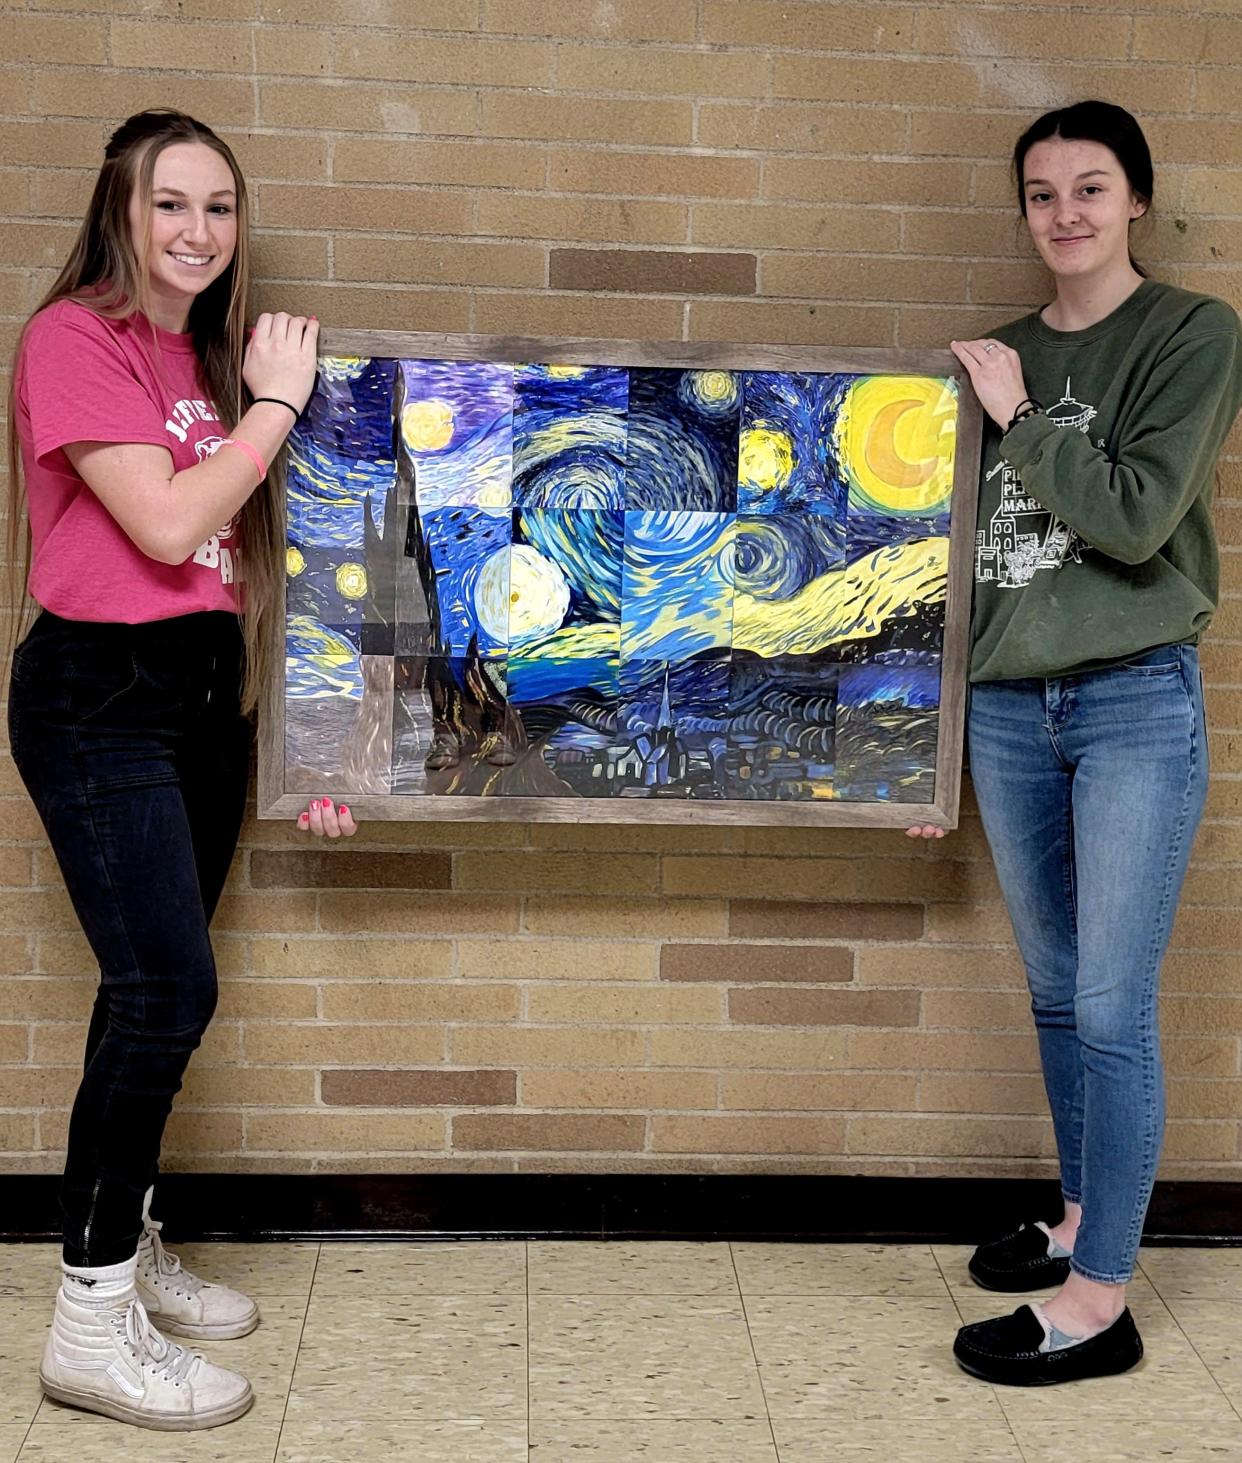 Jefferson High School art students Samantha Ledger, left, and Elizabeth Giles hold a framed mixed media artwork created by Sarah Carter’s 2-D design class. The project was inspired by Vincent van Gogh's famous oil painting "Starry Night."